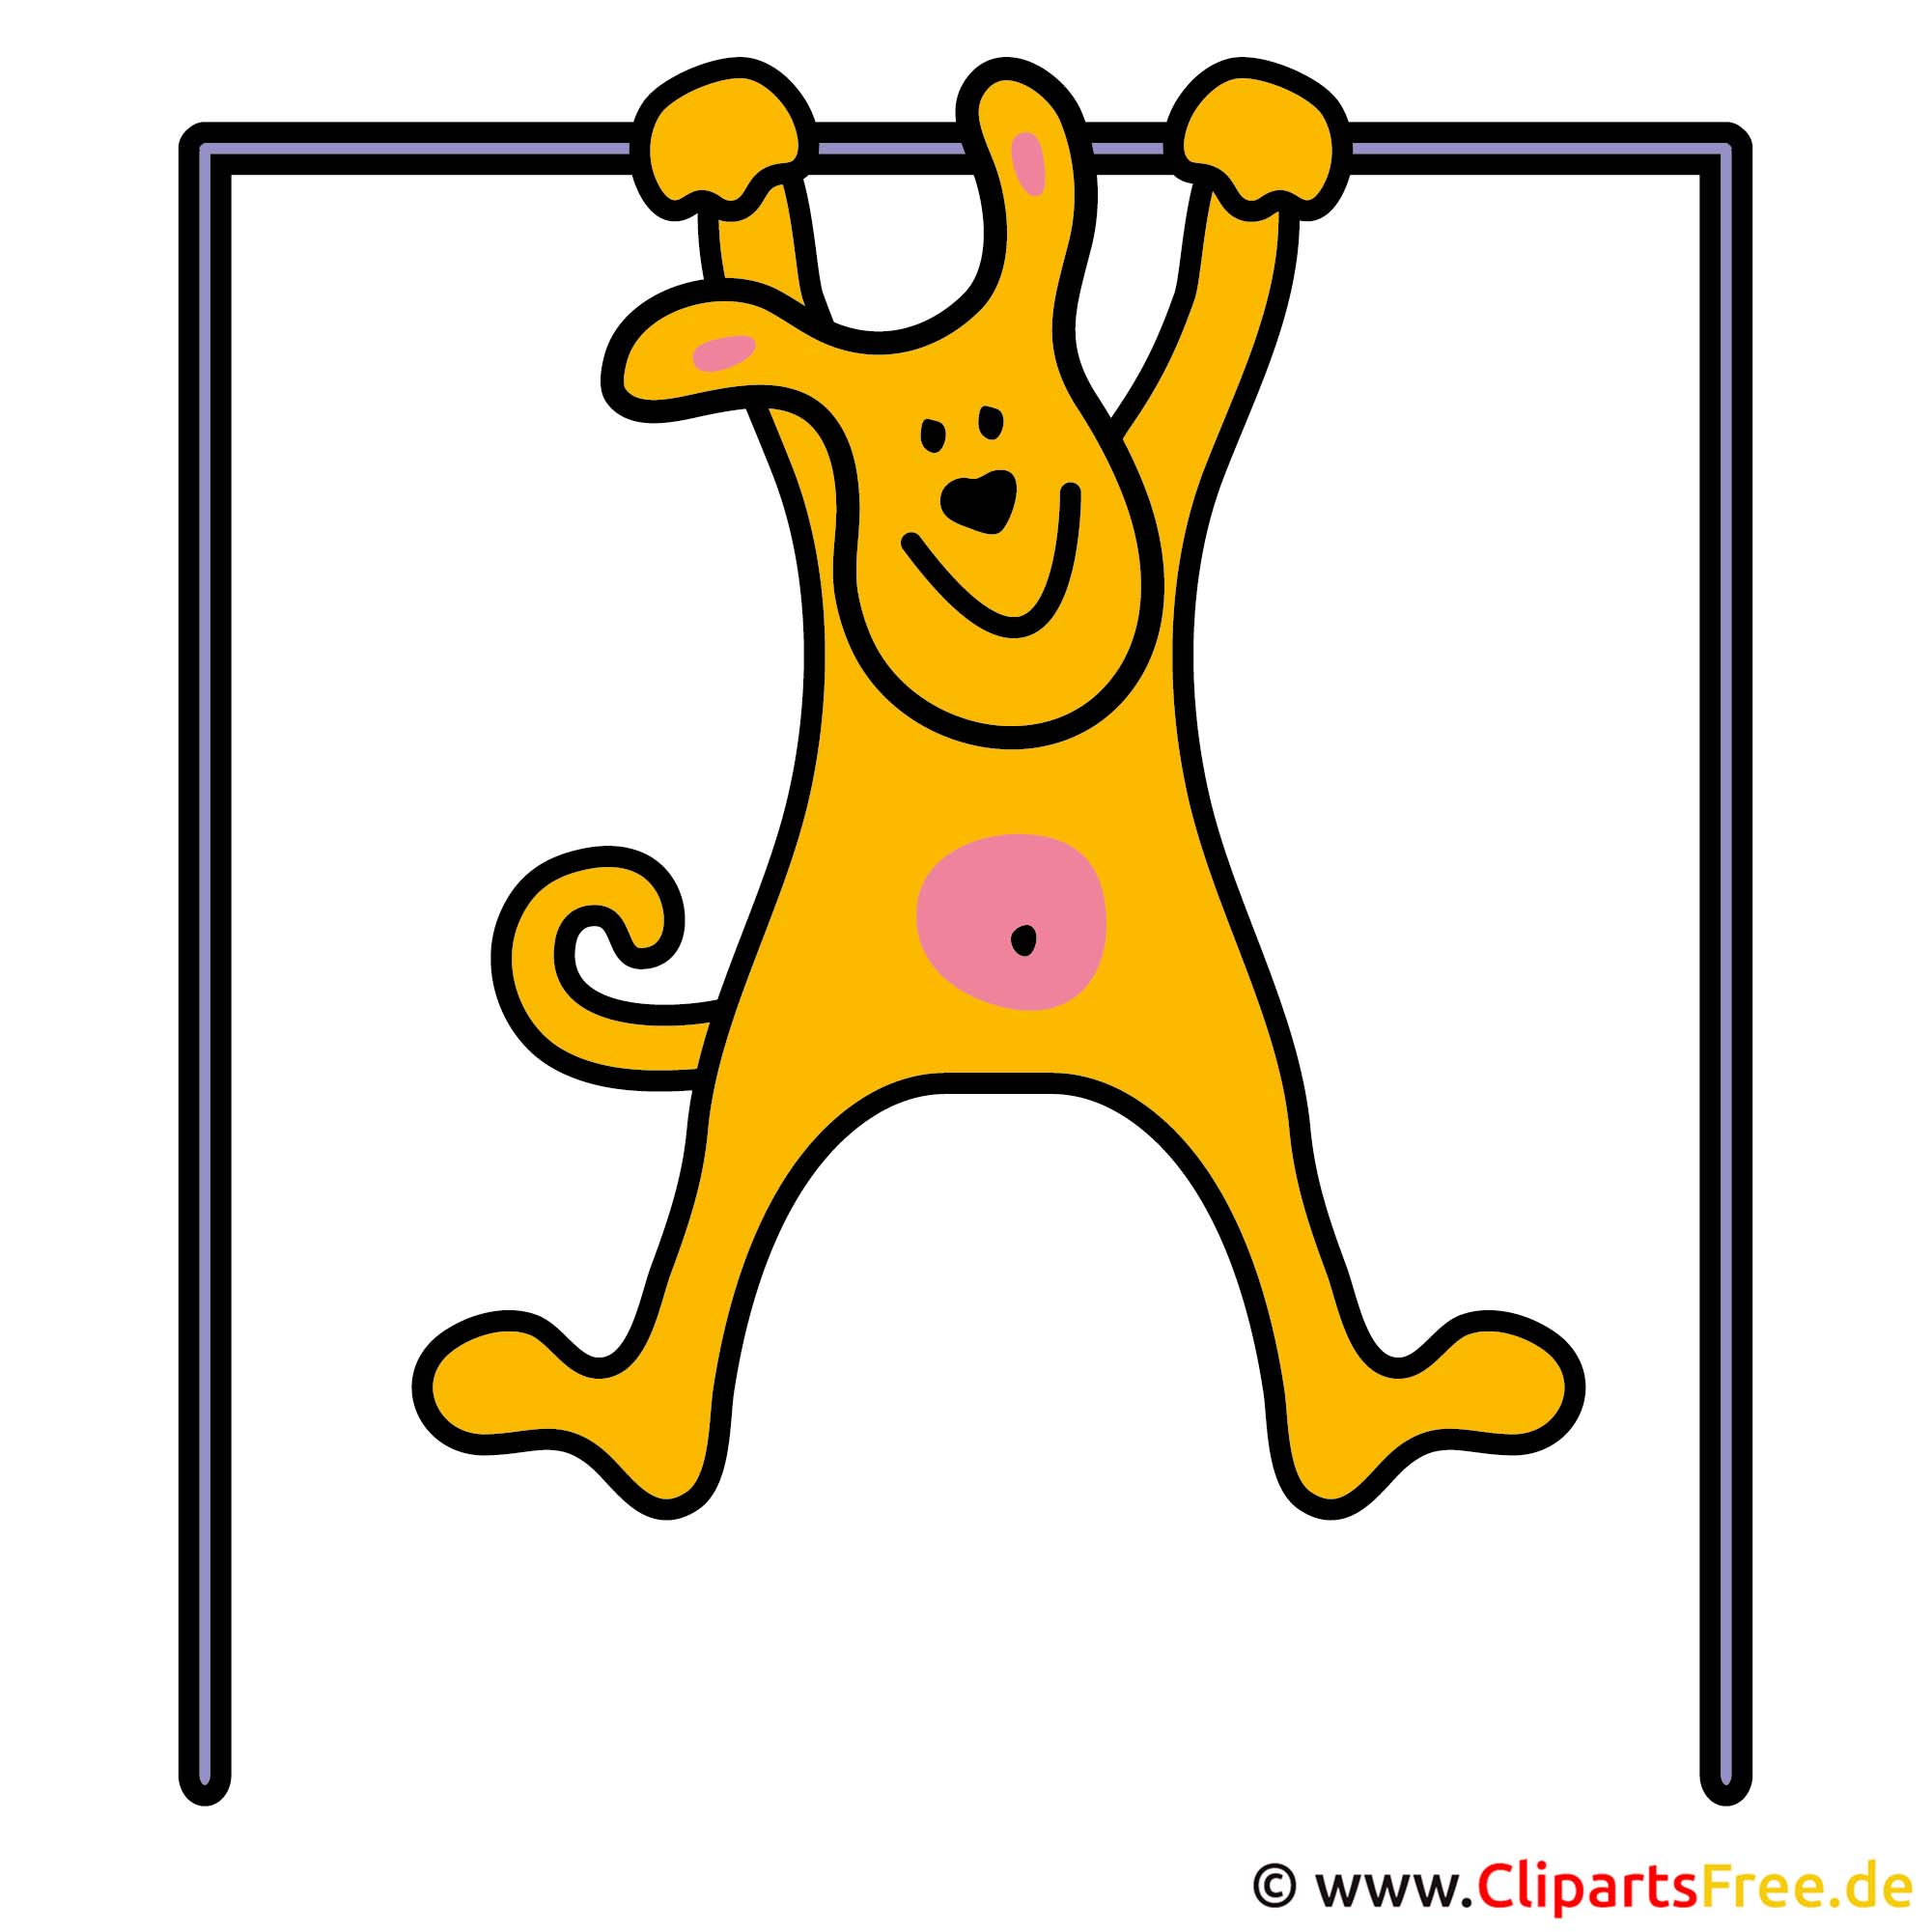 fitness animated clipart - photo #26